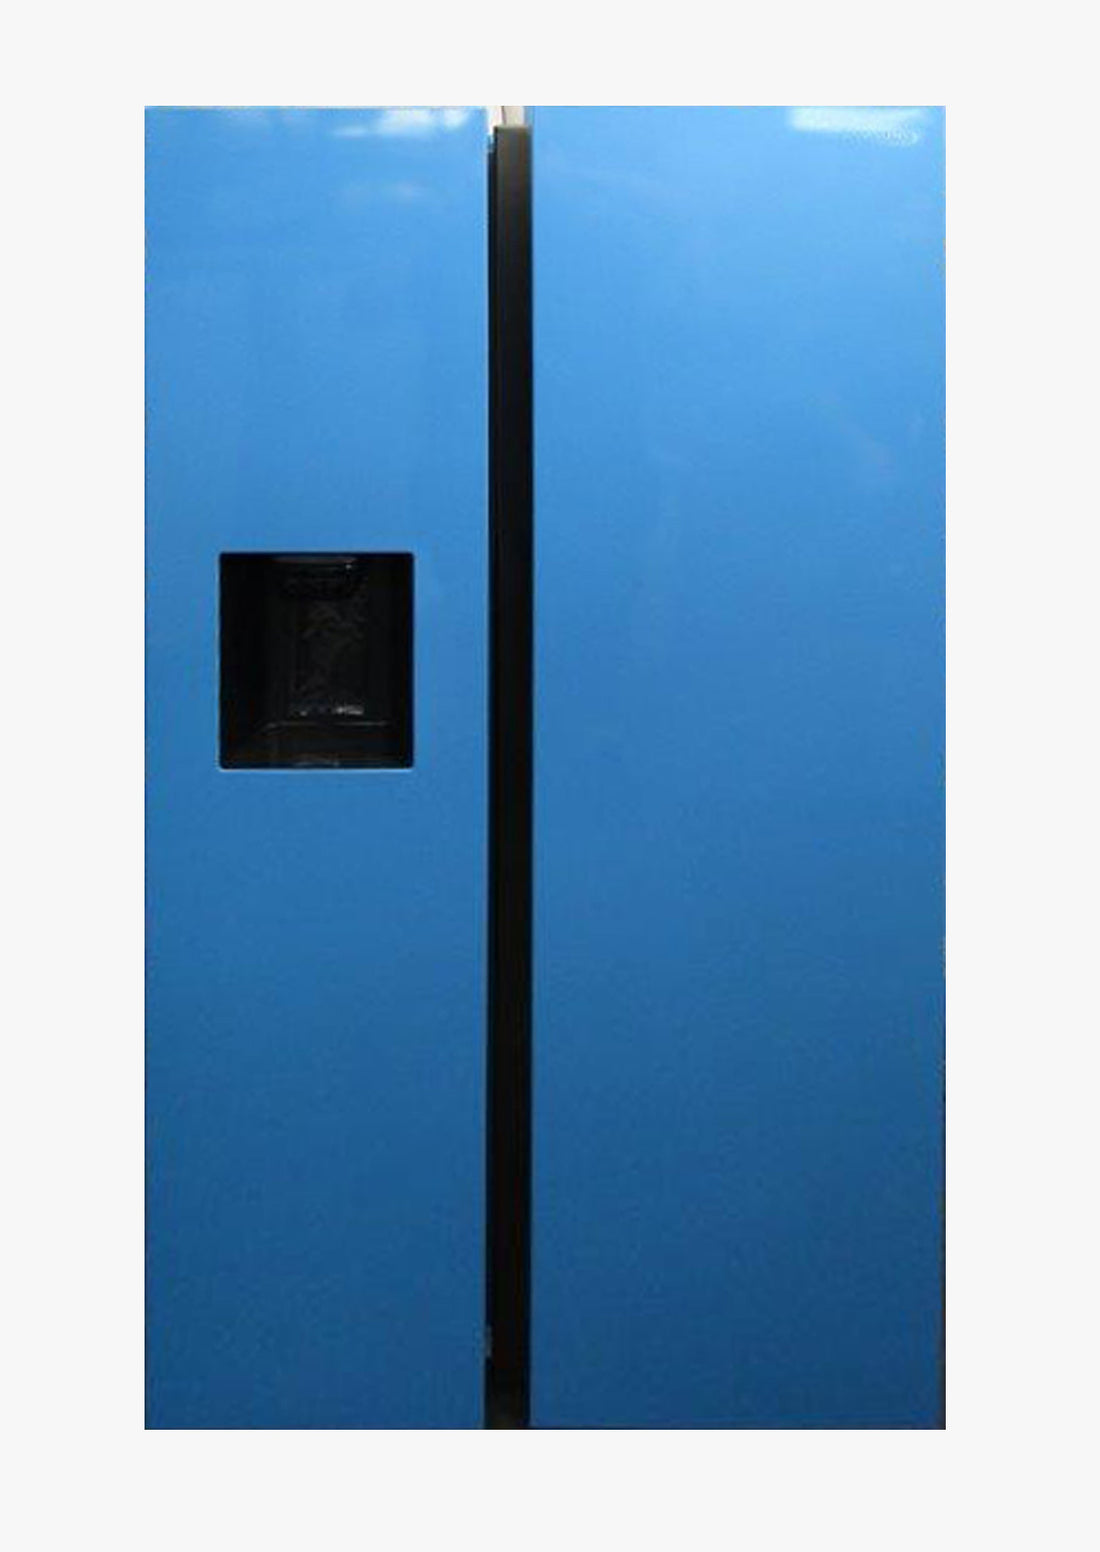 Samsung RS68A8820 Fridge Freezer American Plumbed Ice & Water in Bespoke Electric Blue